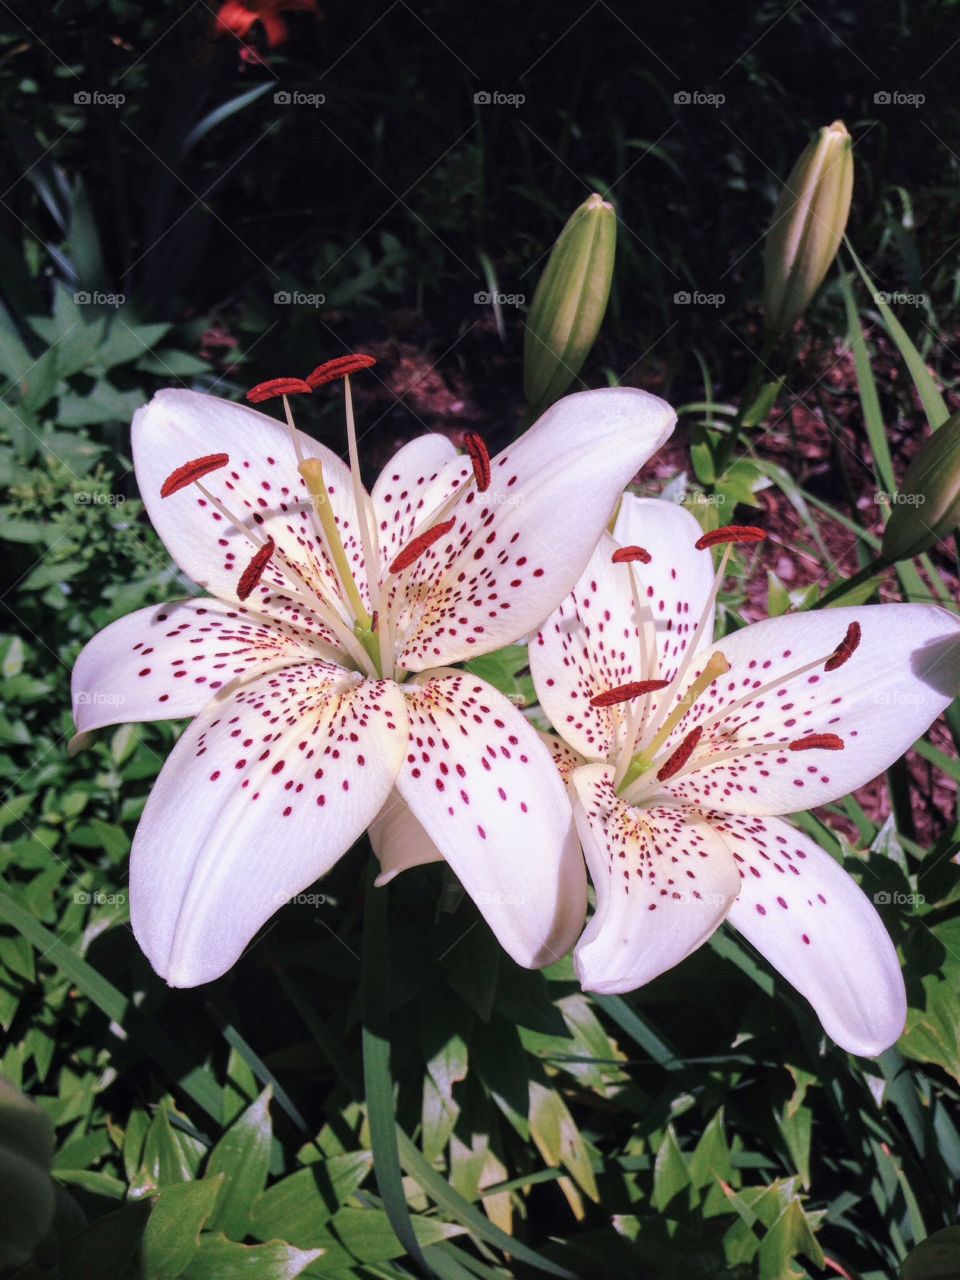 Lilies in Bloom